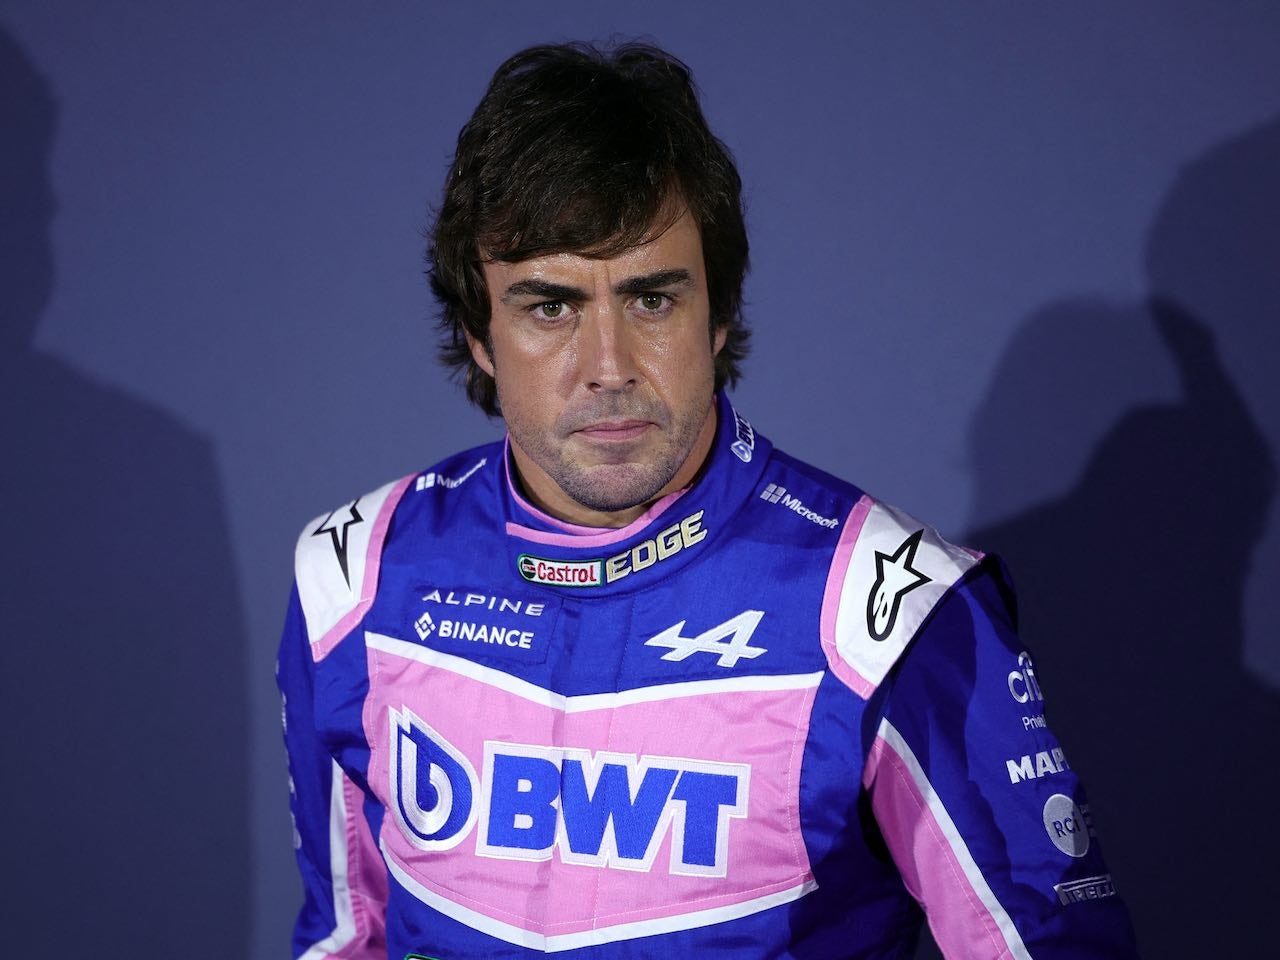 Alonso sets up driver management agency